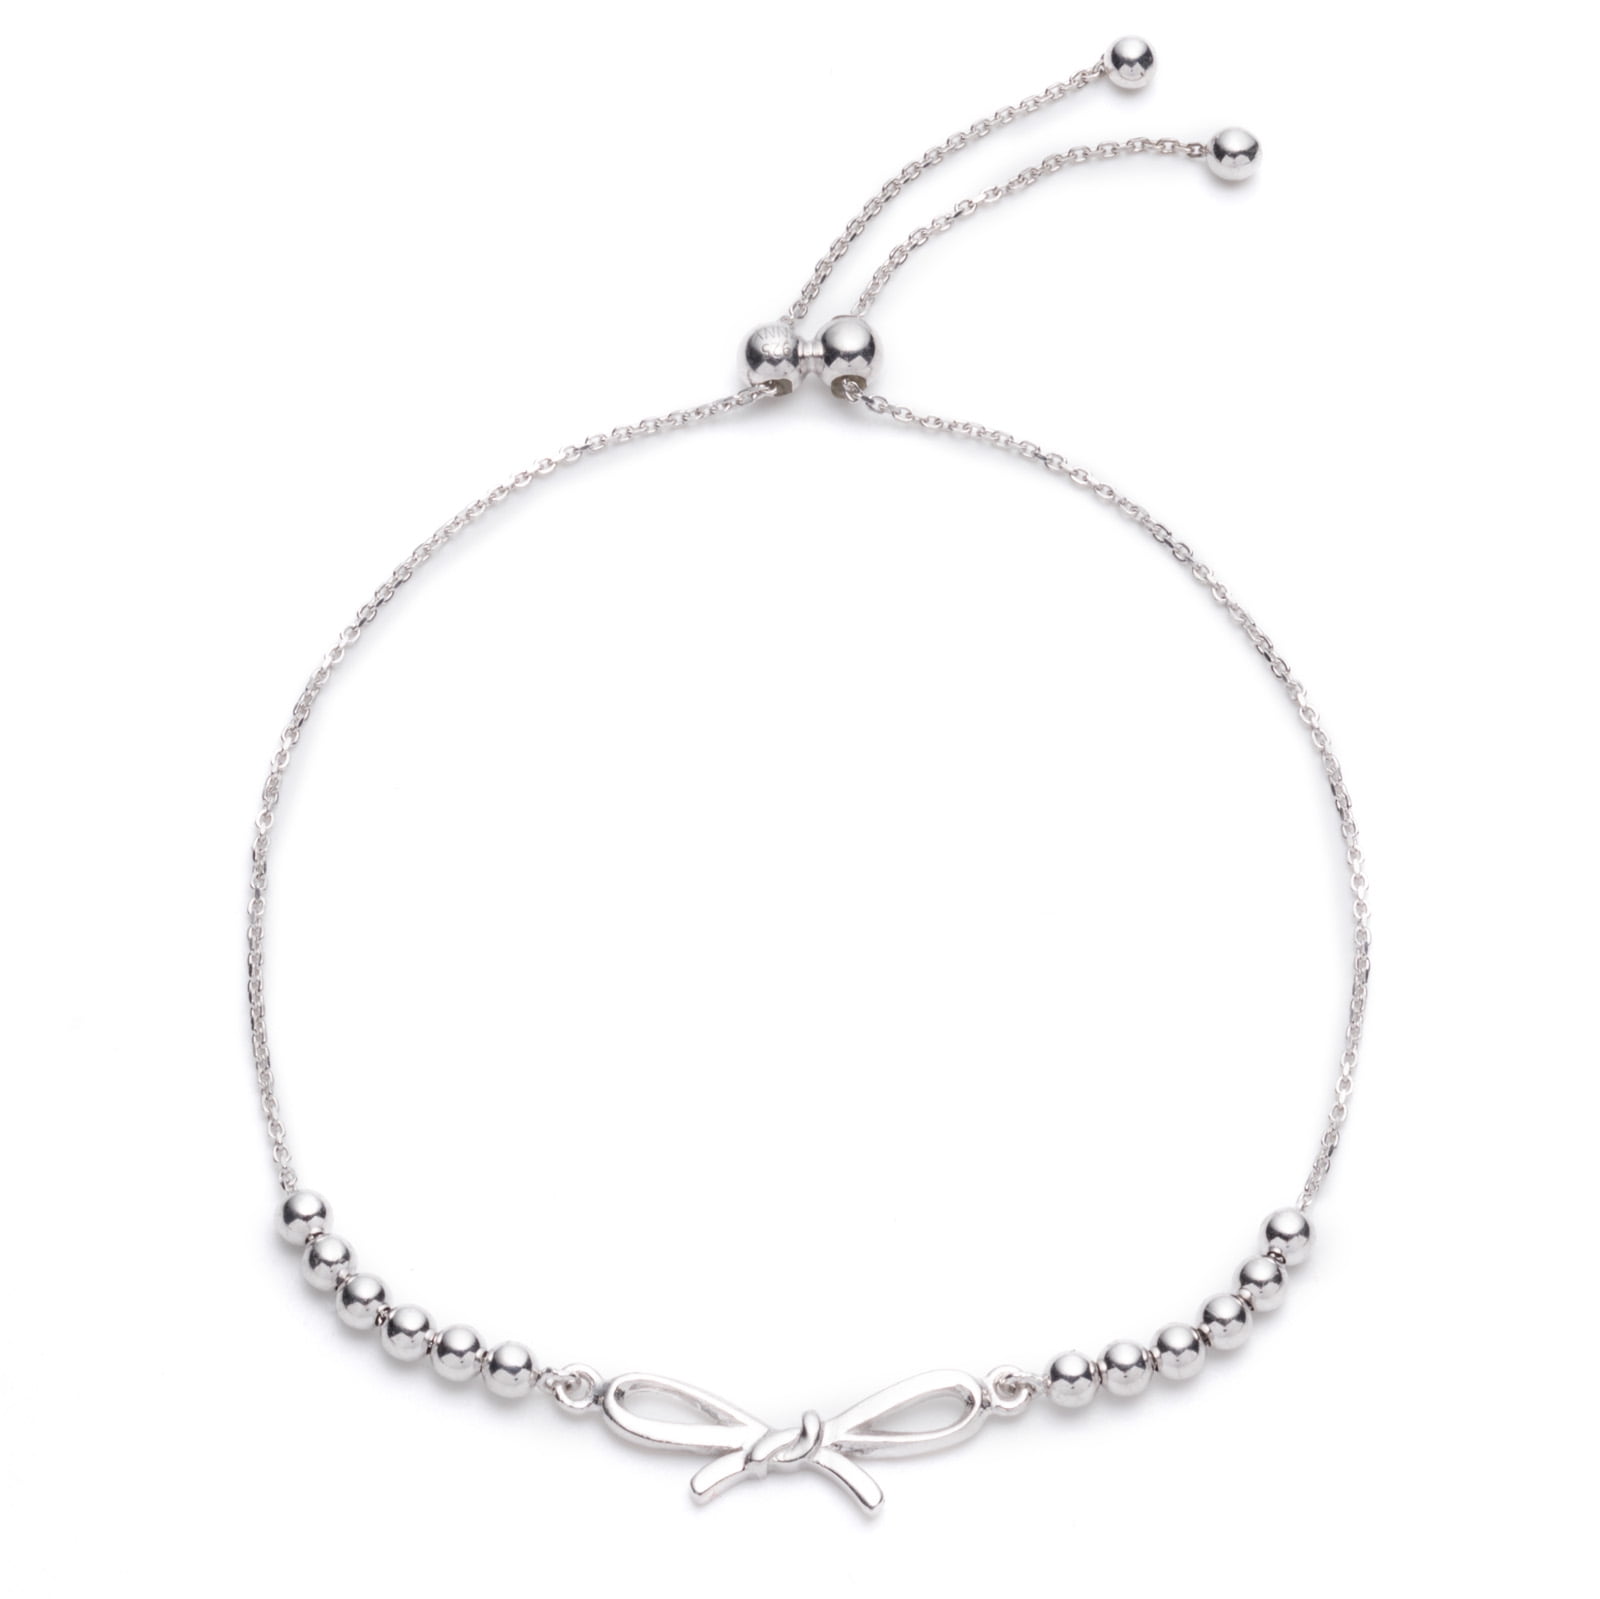 Rhodium Plated Sterling Silver Adjustable Beaded bracelet with Bow,  Expandable 9.25 Inch